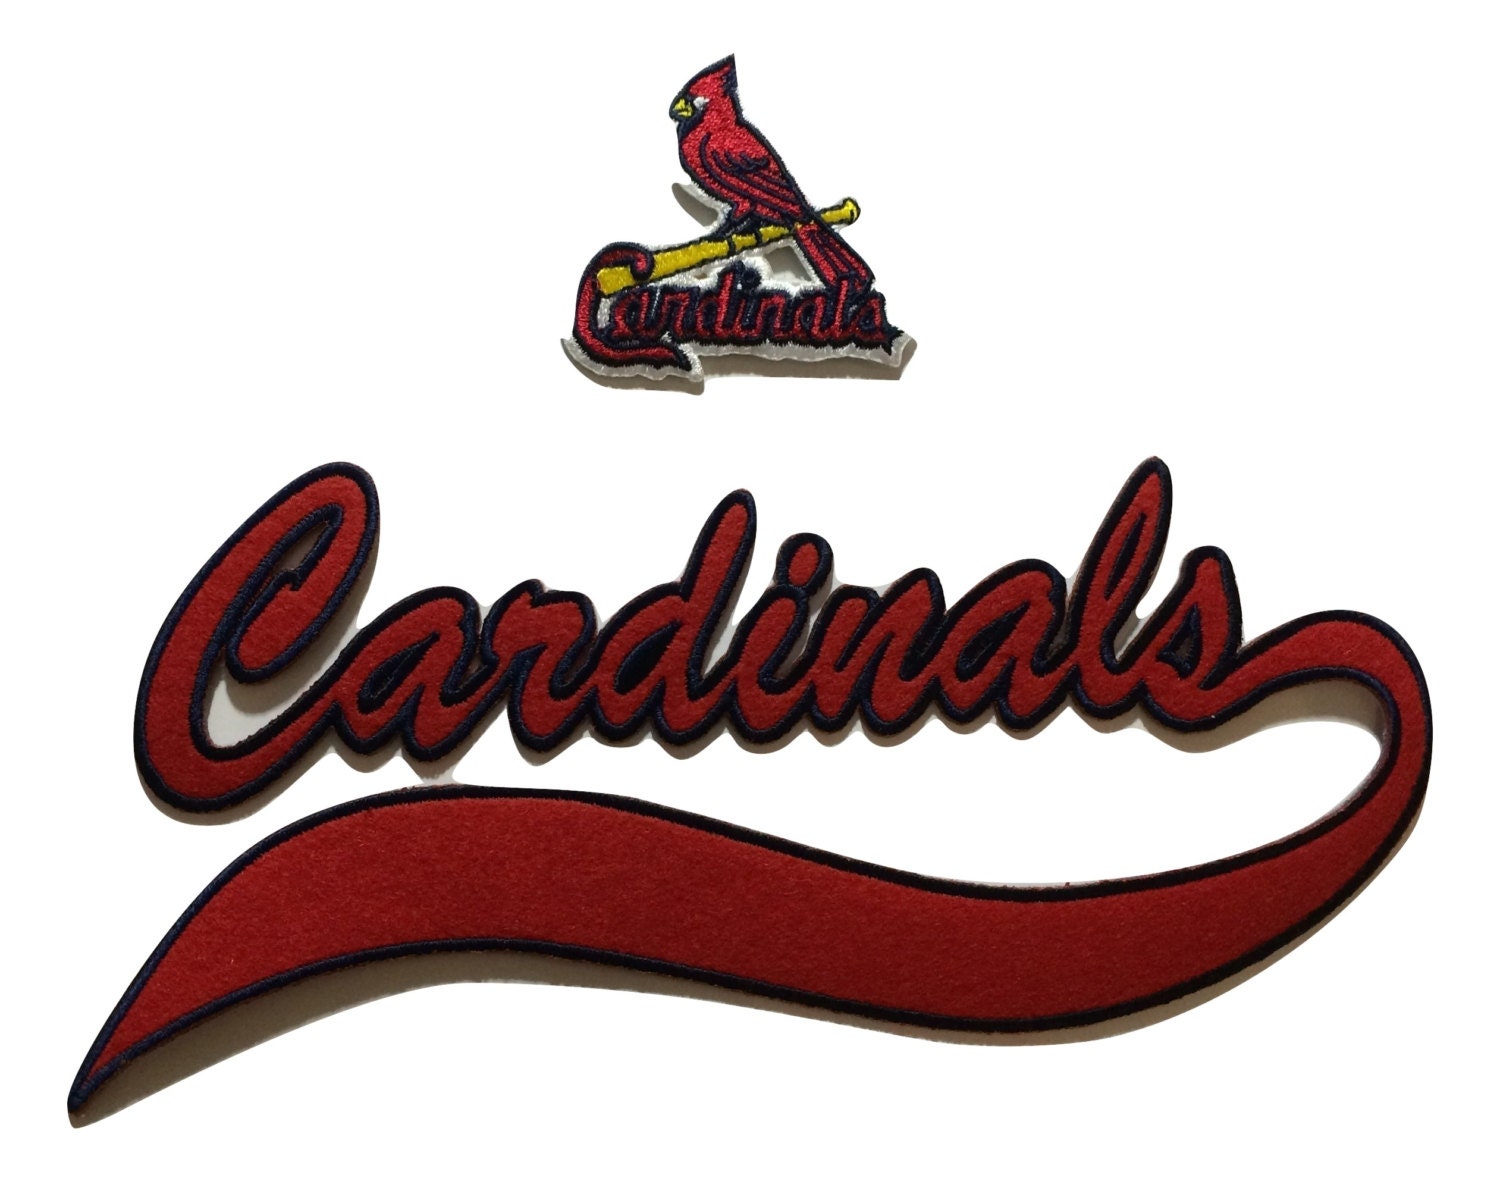 St. Louis Cardinals embroidered iron on patch set 2 patches 1 large